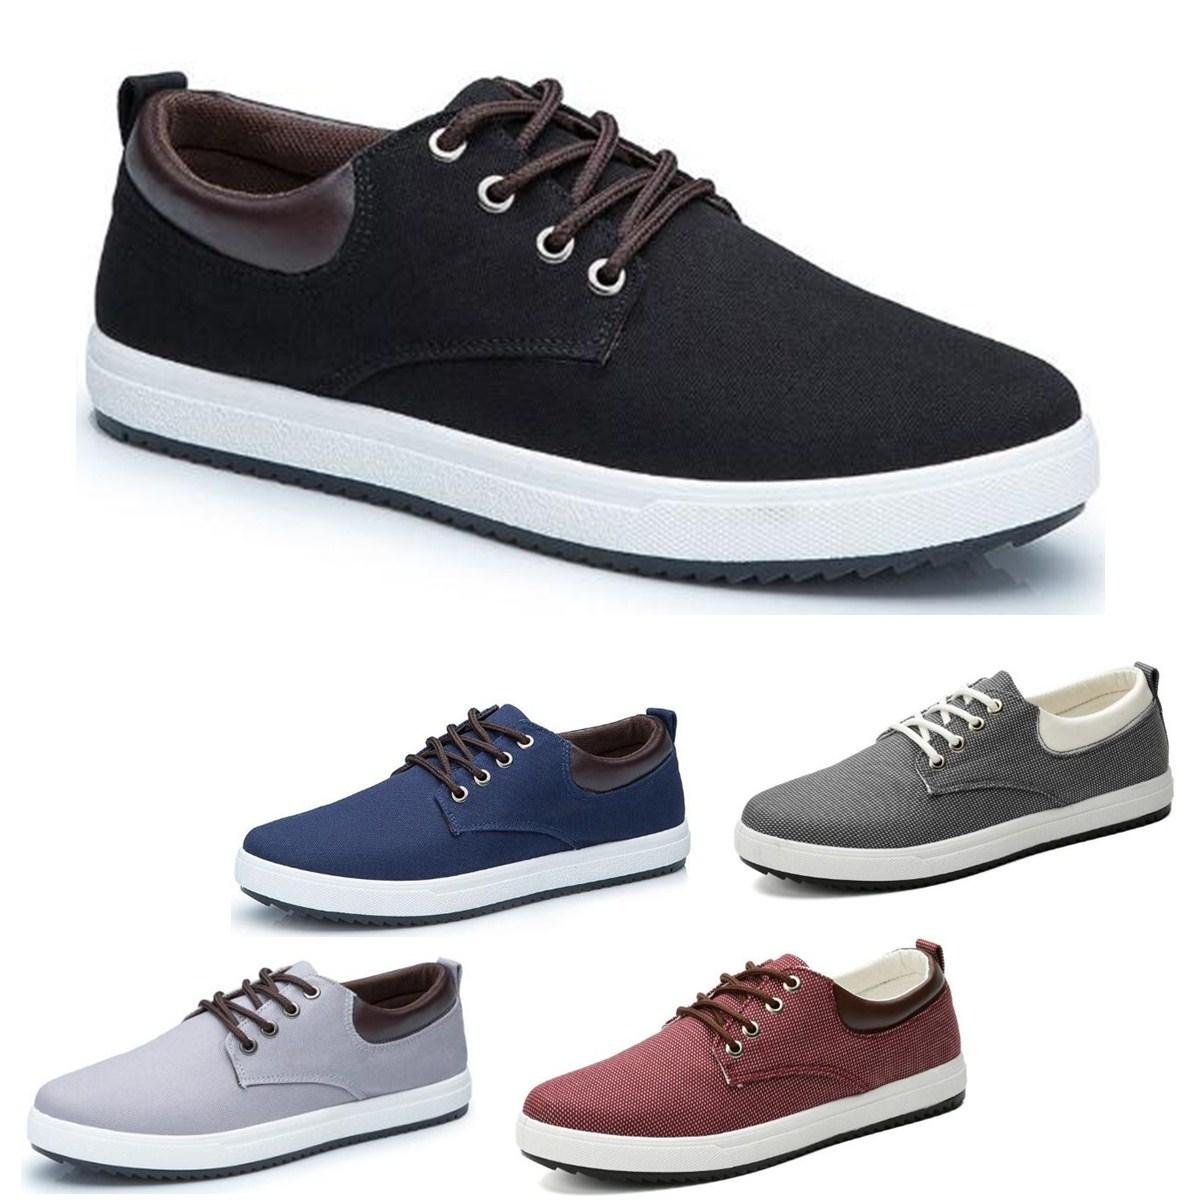 Men Casual Canvas Loafers Lace up Driving Walking Flats